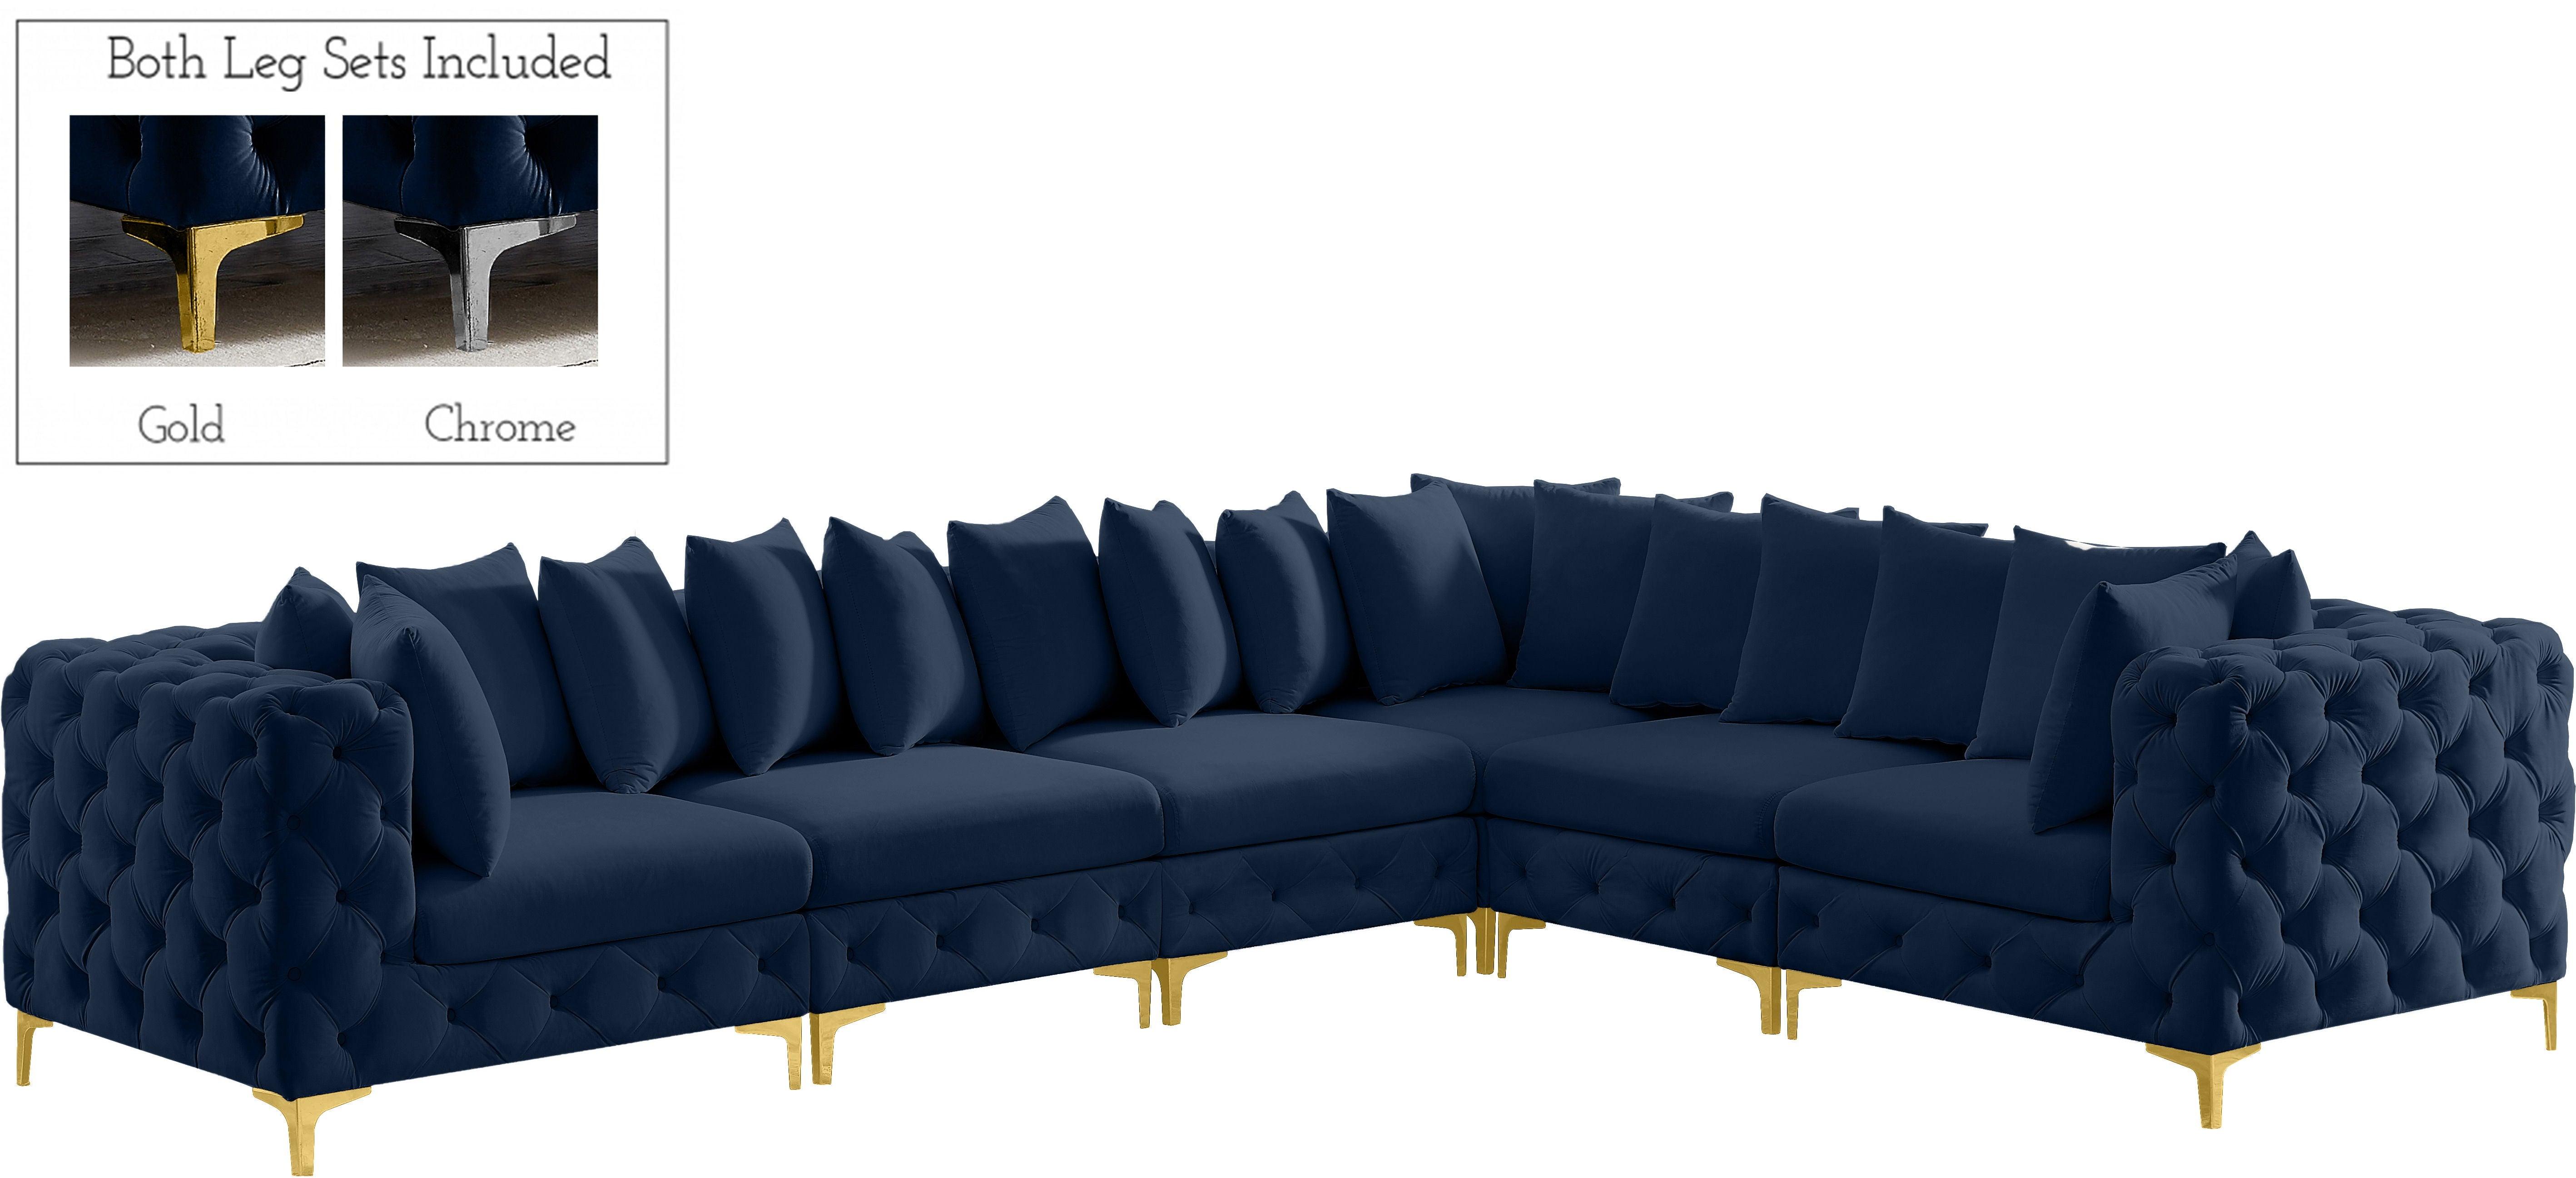 Meridian Furniture - Tremblay - Modular Sectional 6 Piece - Navy - Fabric - 5th Avenue Furniture